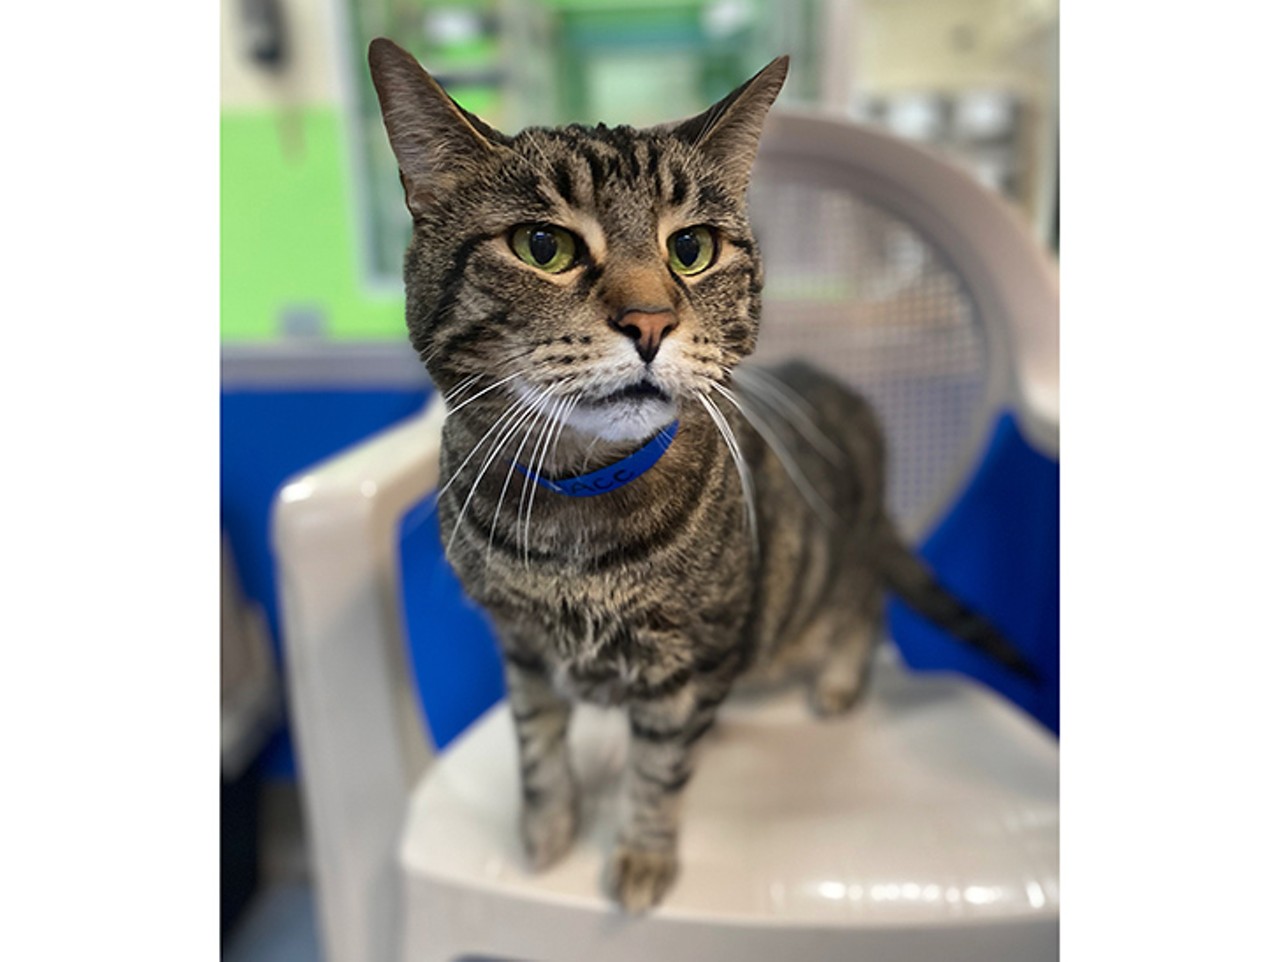 Ace, a 10-year-old male cat, is at the Orlando shelter. Ace has a lot of wisdom to share with you!